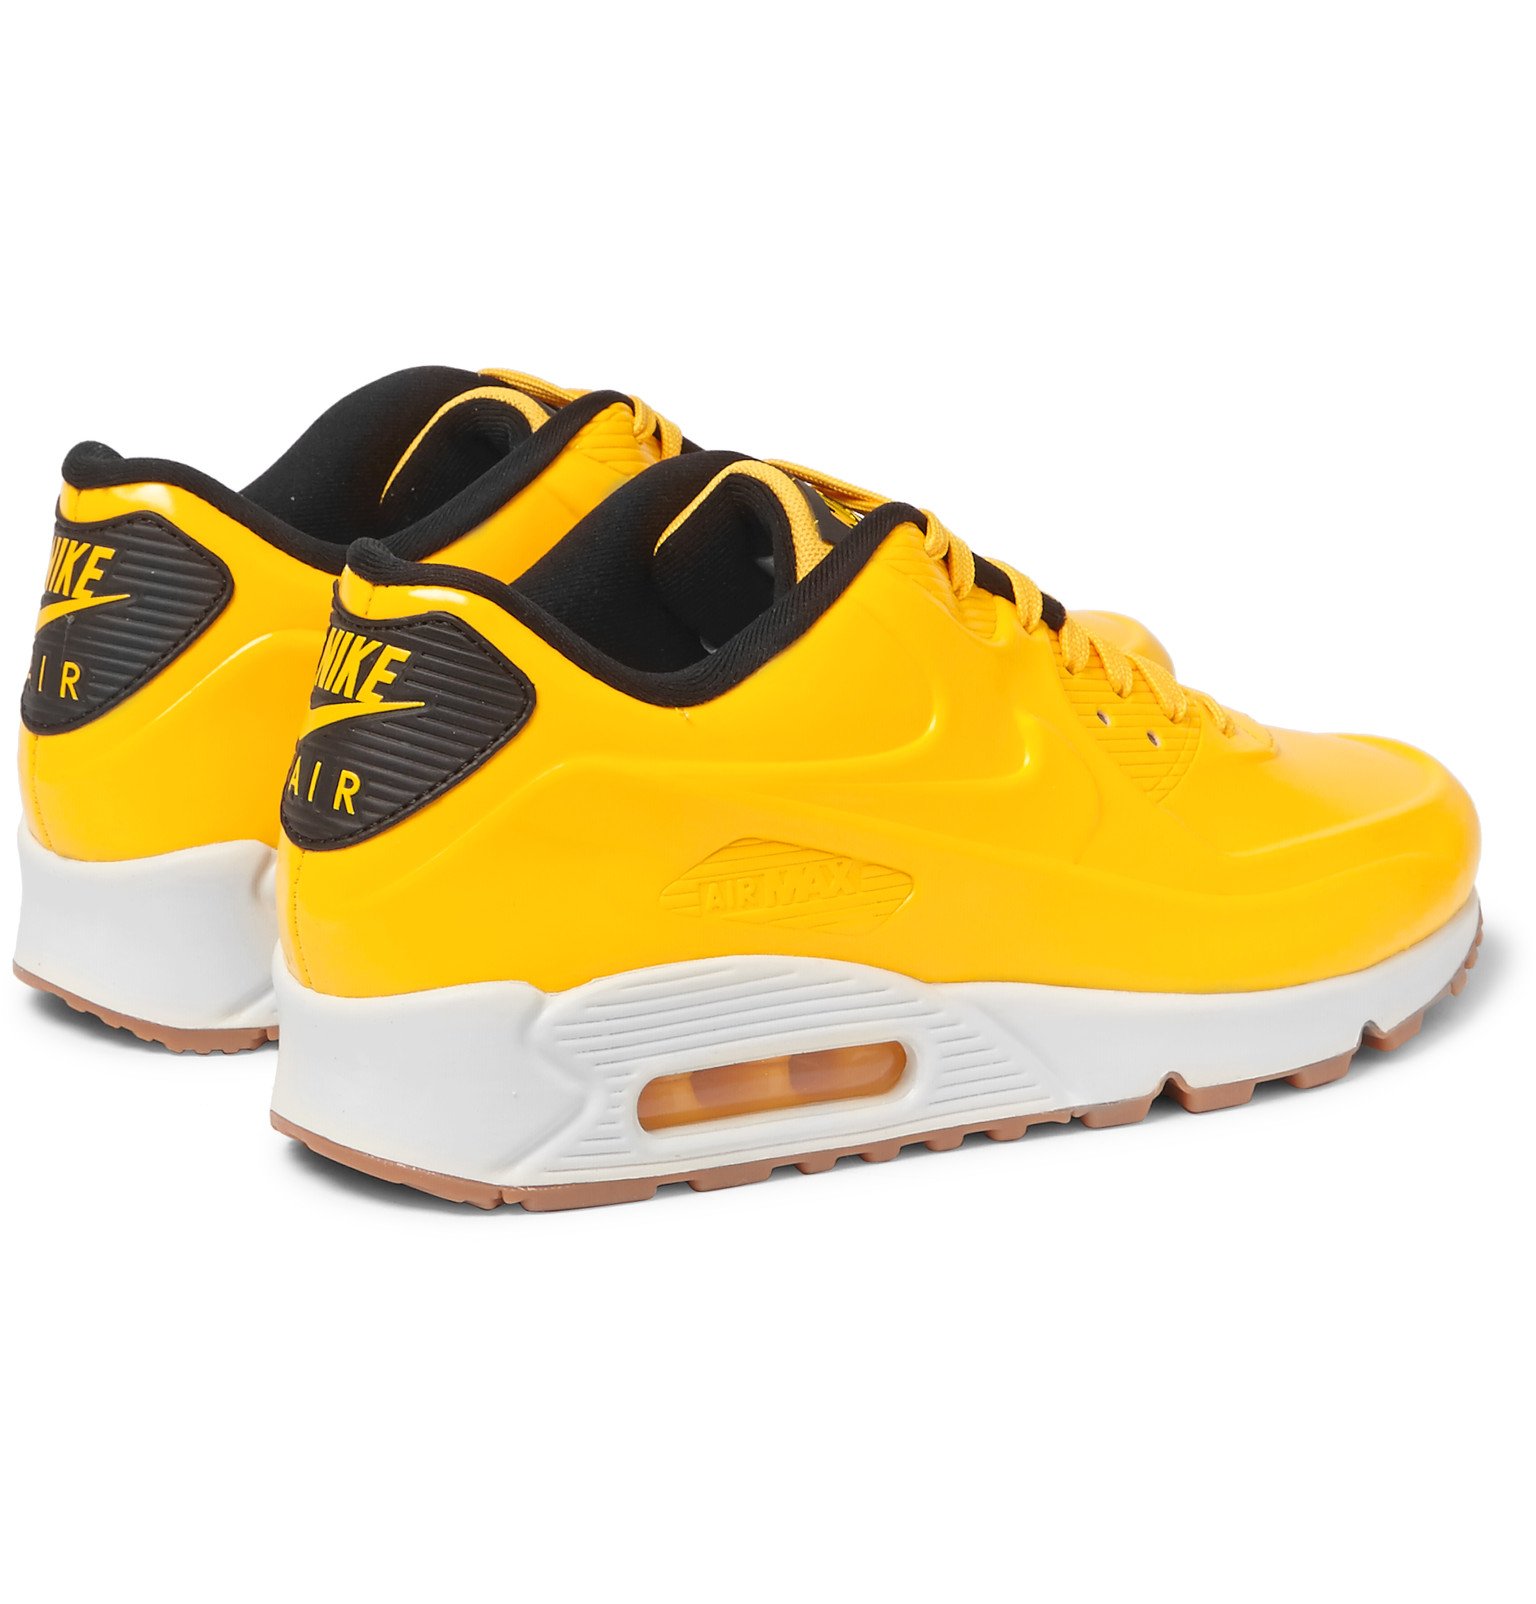 Nike Air Max 90 Vt Patent Leather Sneakers In Yellow For Men Lyst